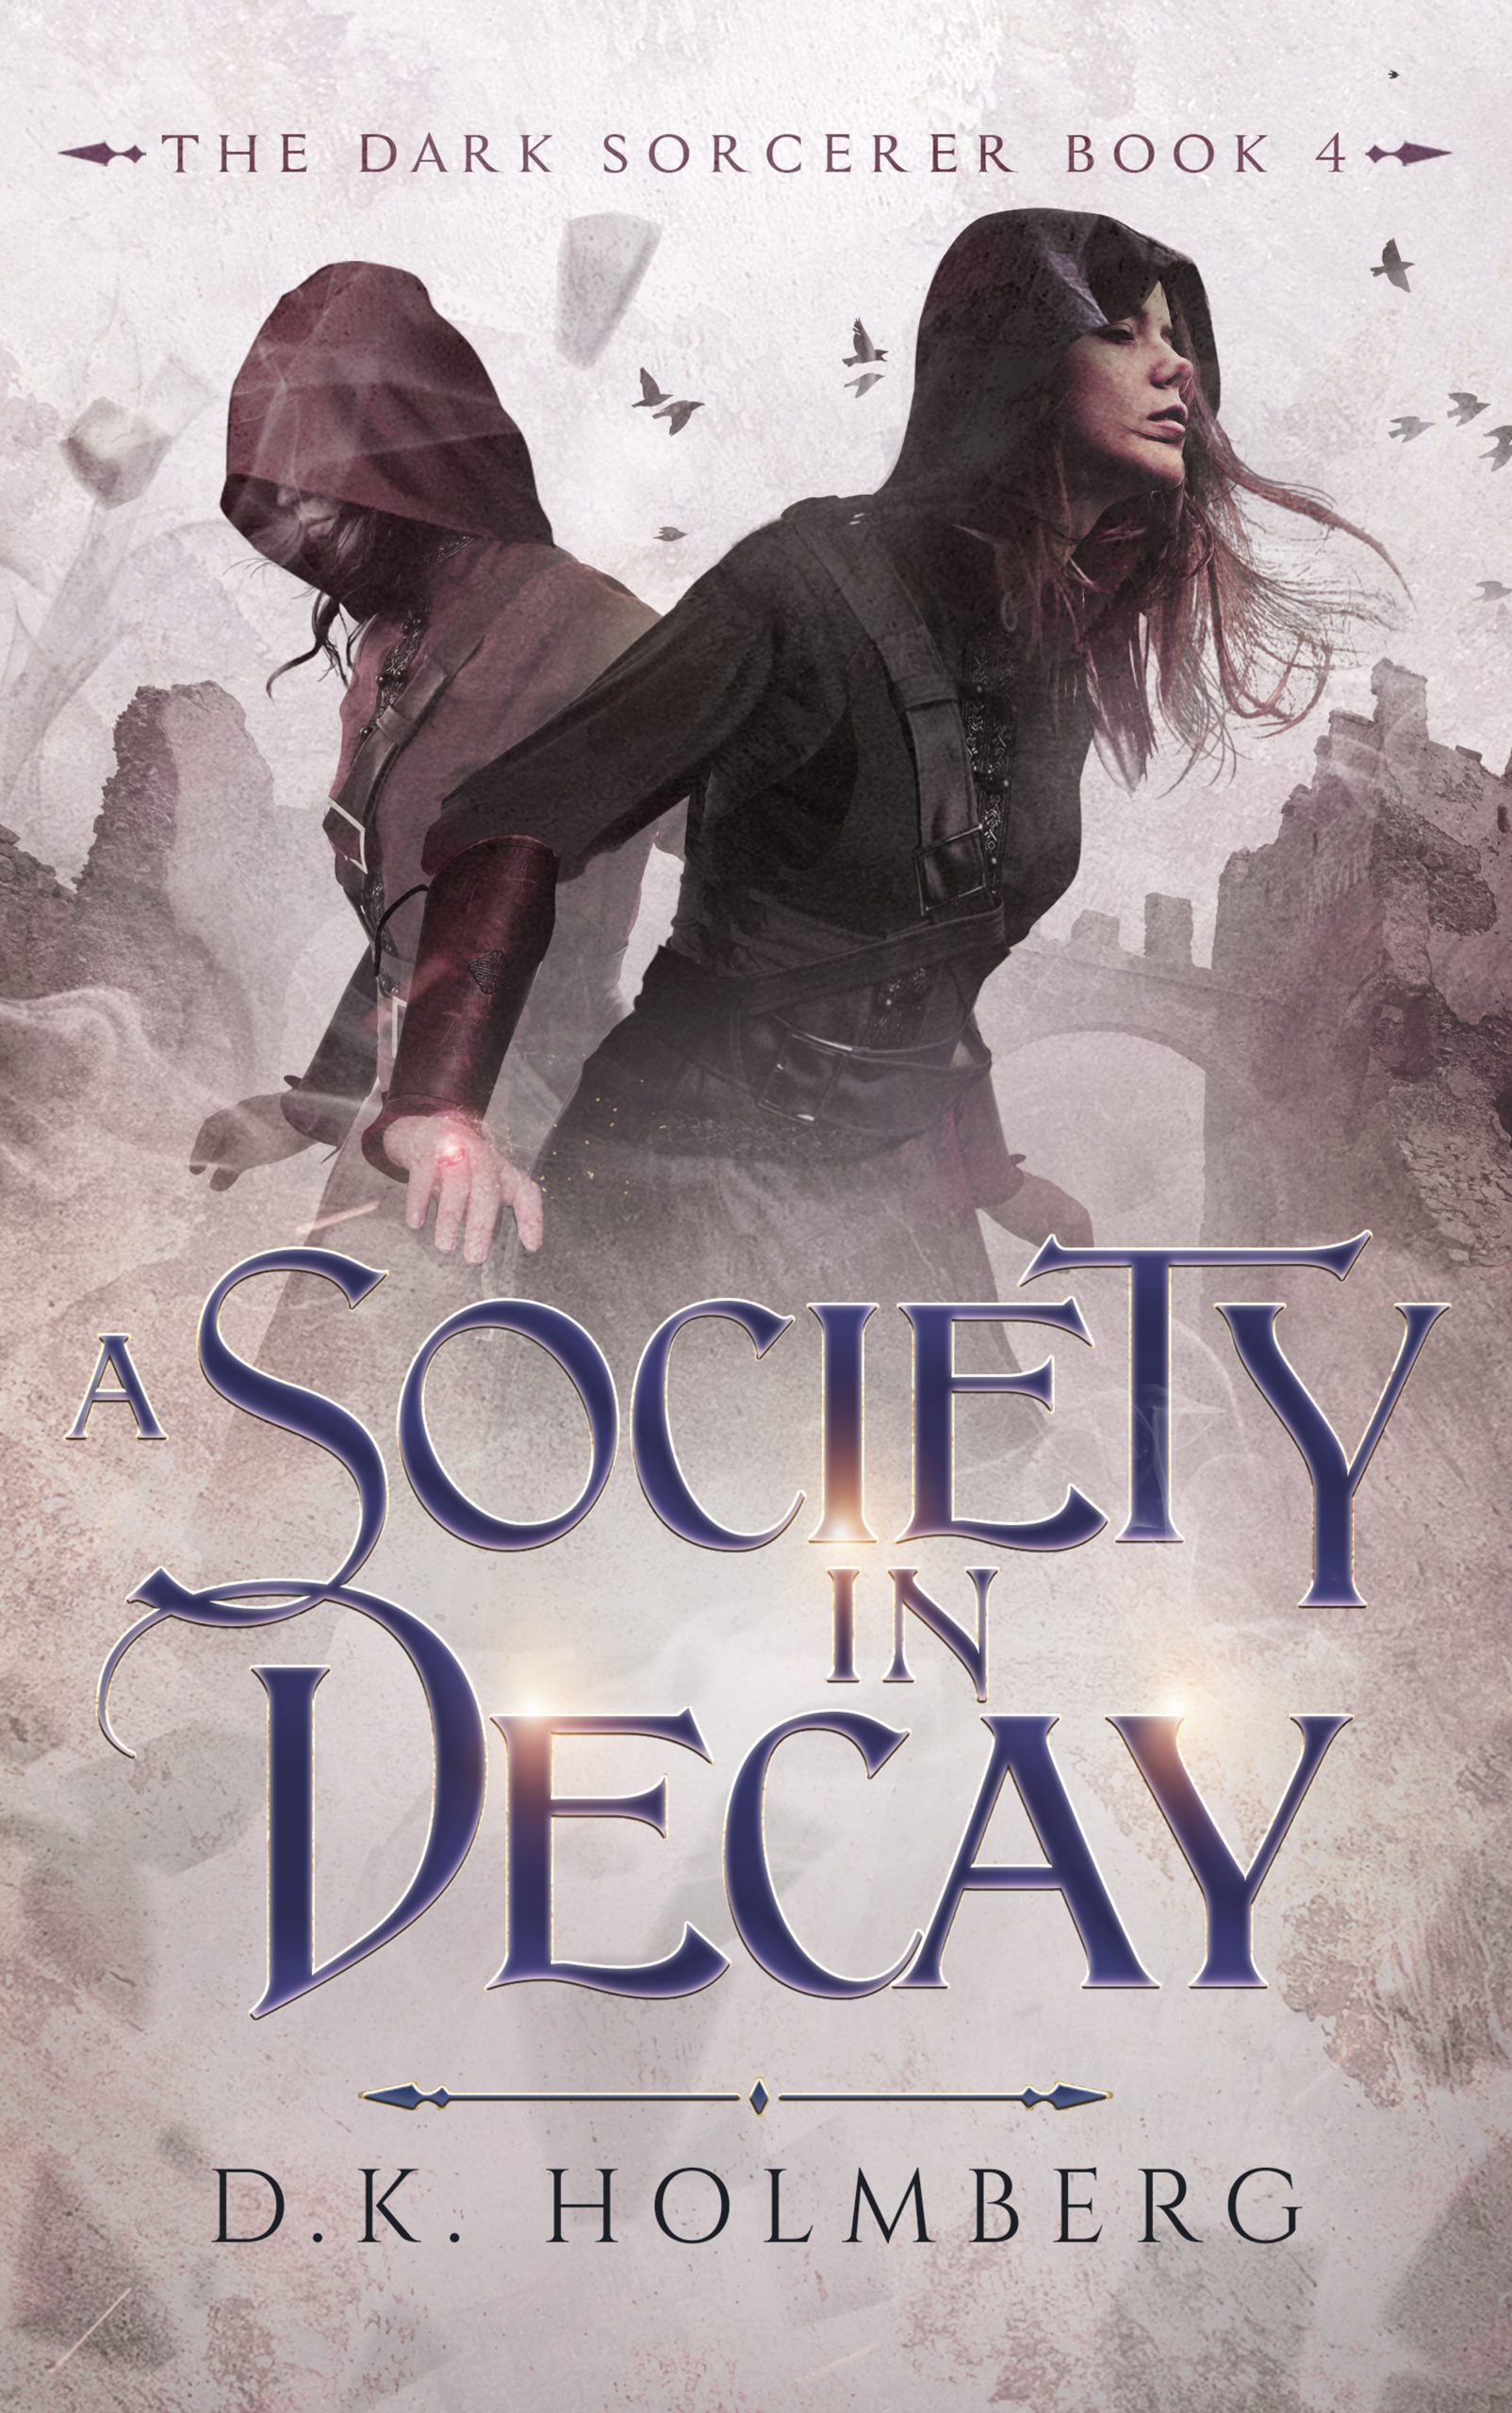 https://www.dkholmberg.com/wp-content/uploads/2022/08/DS-4-A-Society-in-Decay-eBook-scaled.jpg